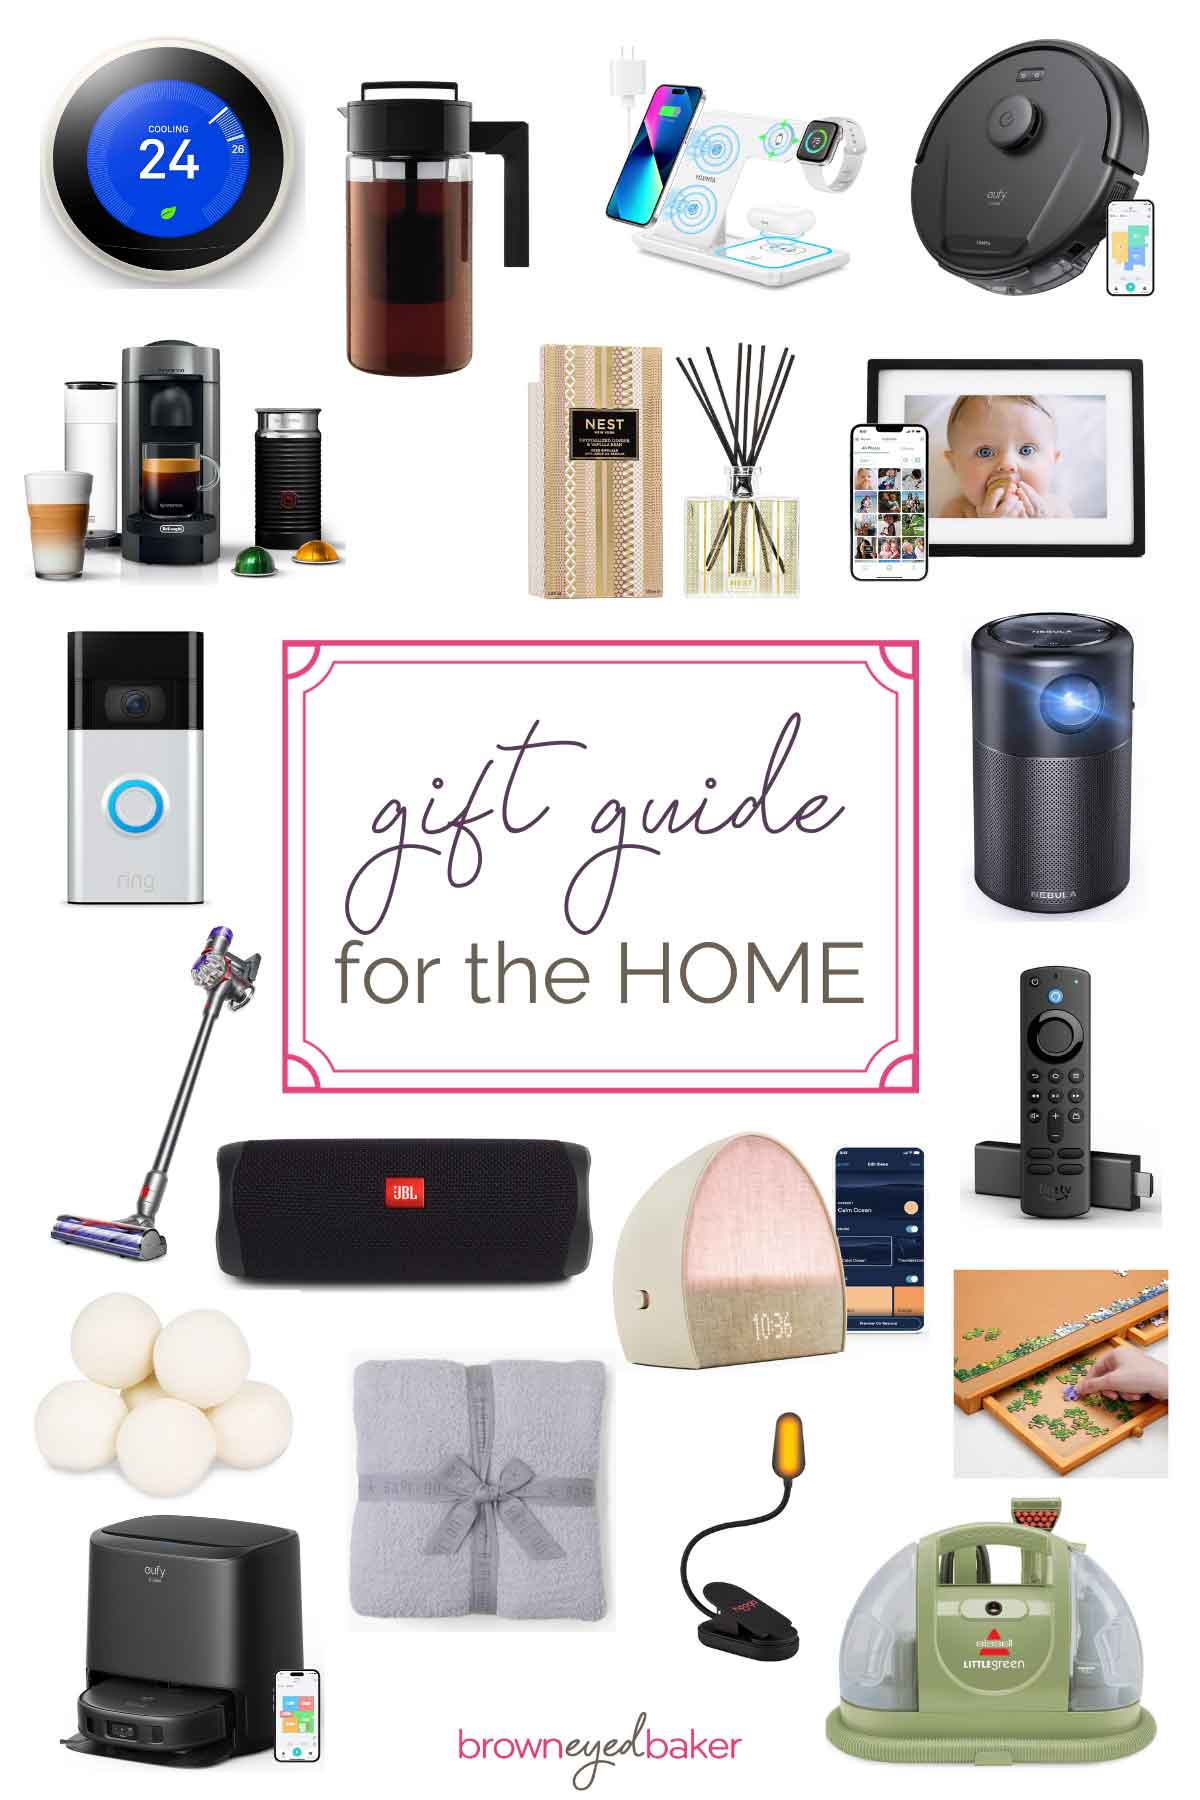 Collage of product images with a pink frame in the center and text inside: "gift guide for the home".